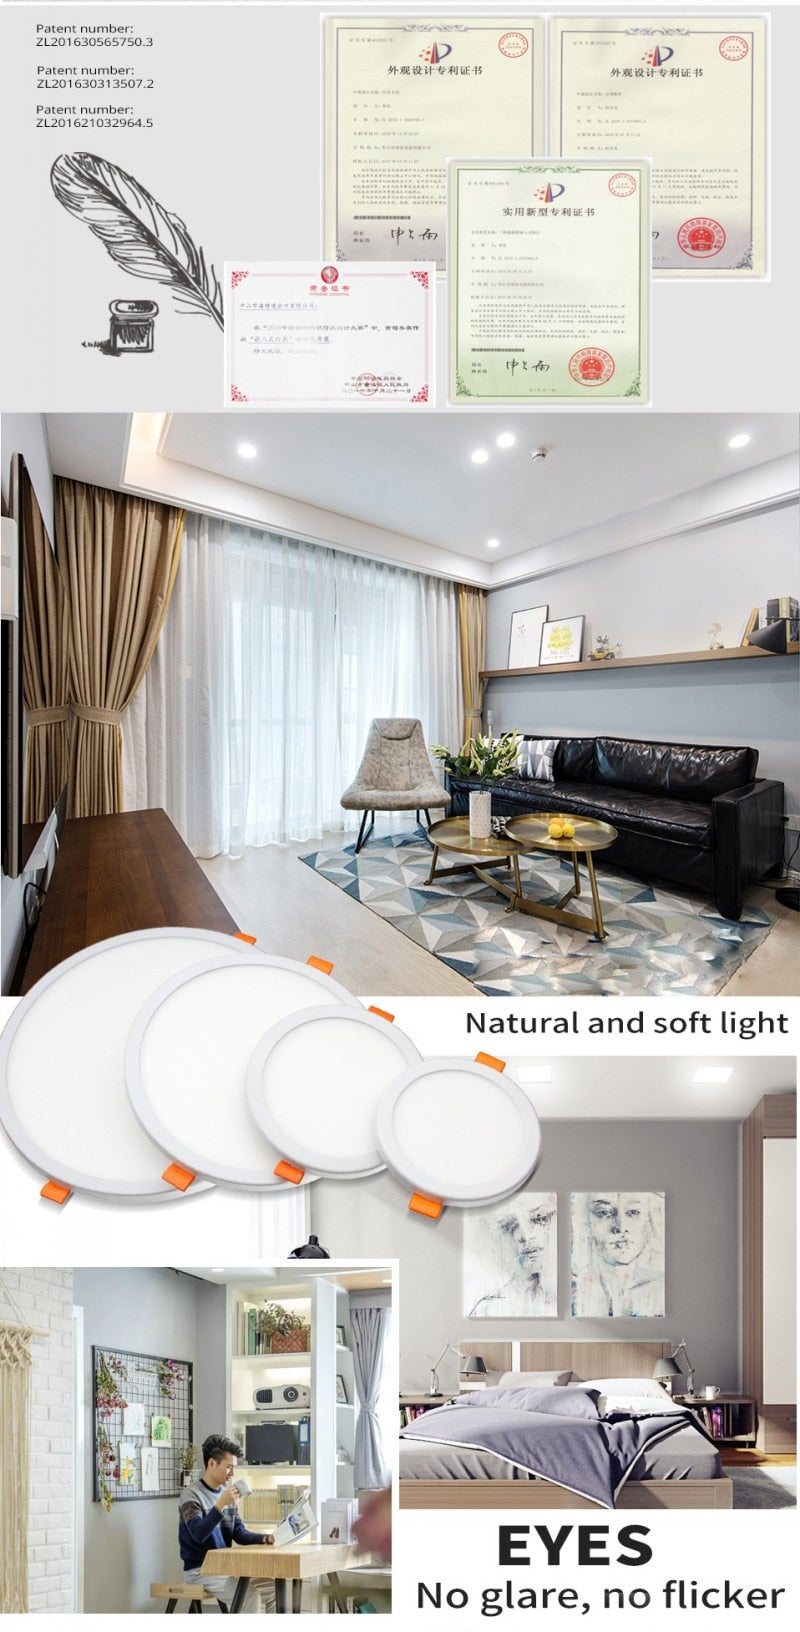 High Quality LED Panel Light Ultra Thin Recessed Downlights 6W 8W 15W 20W 220V Round Square Ceiling Lamp Warm/Cool White